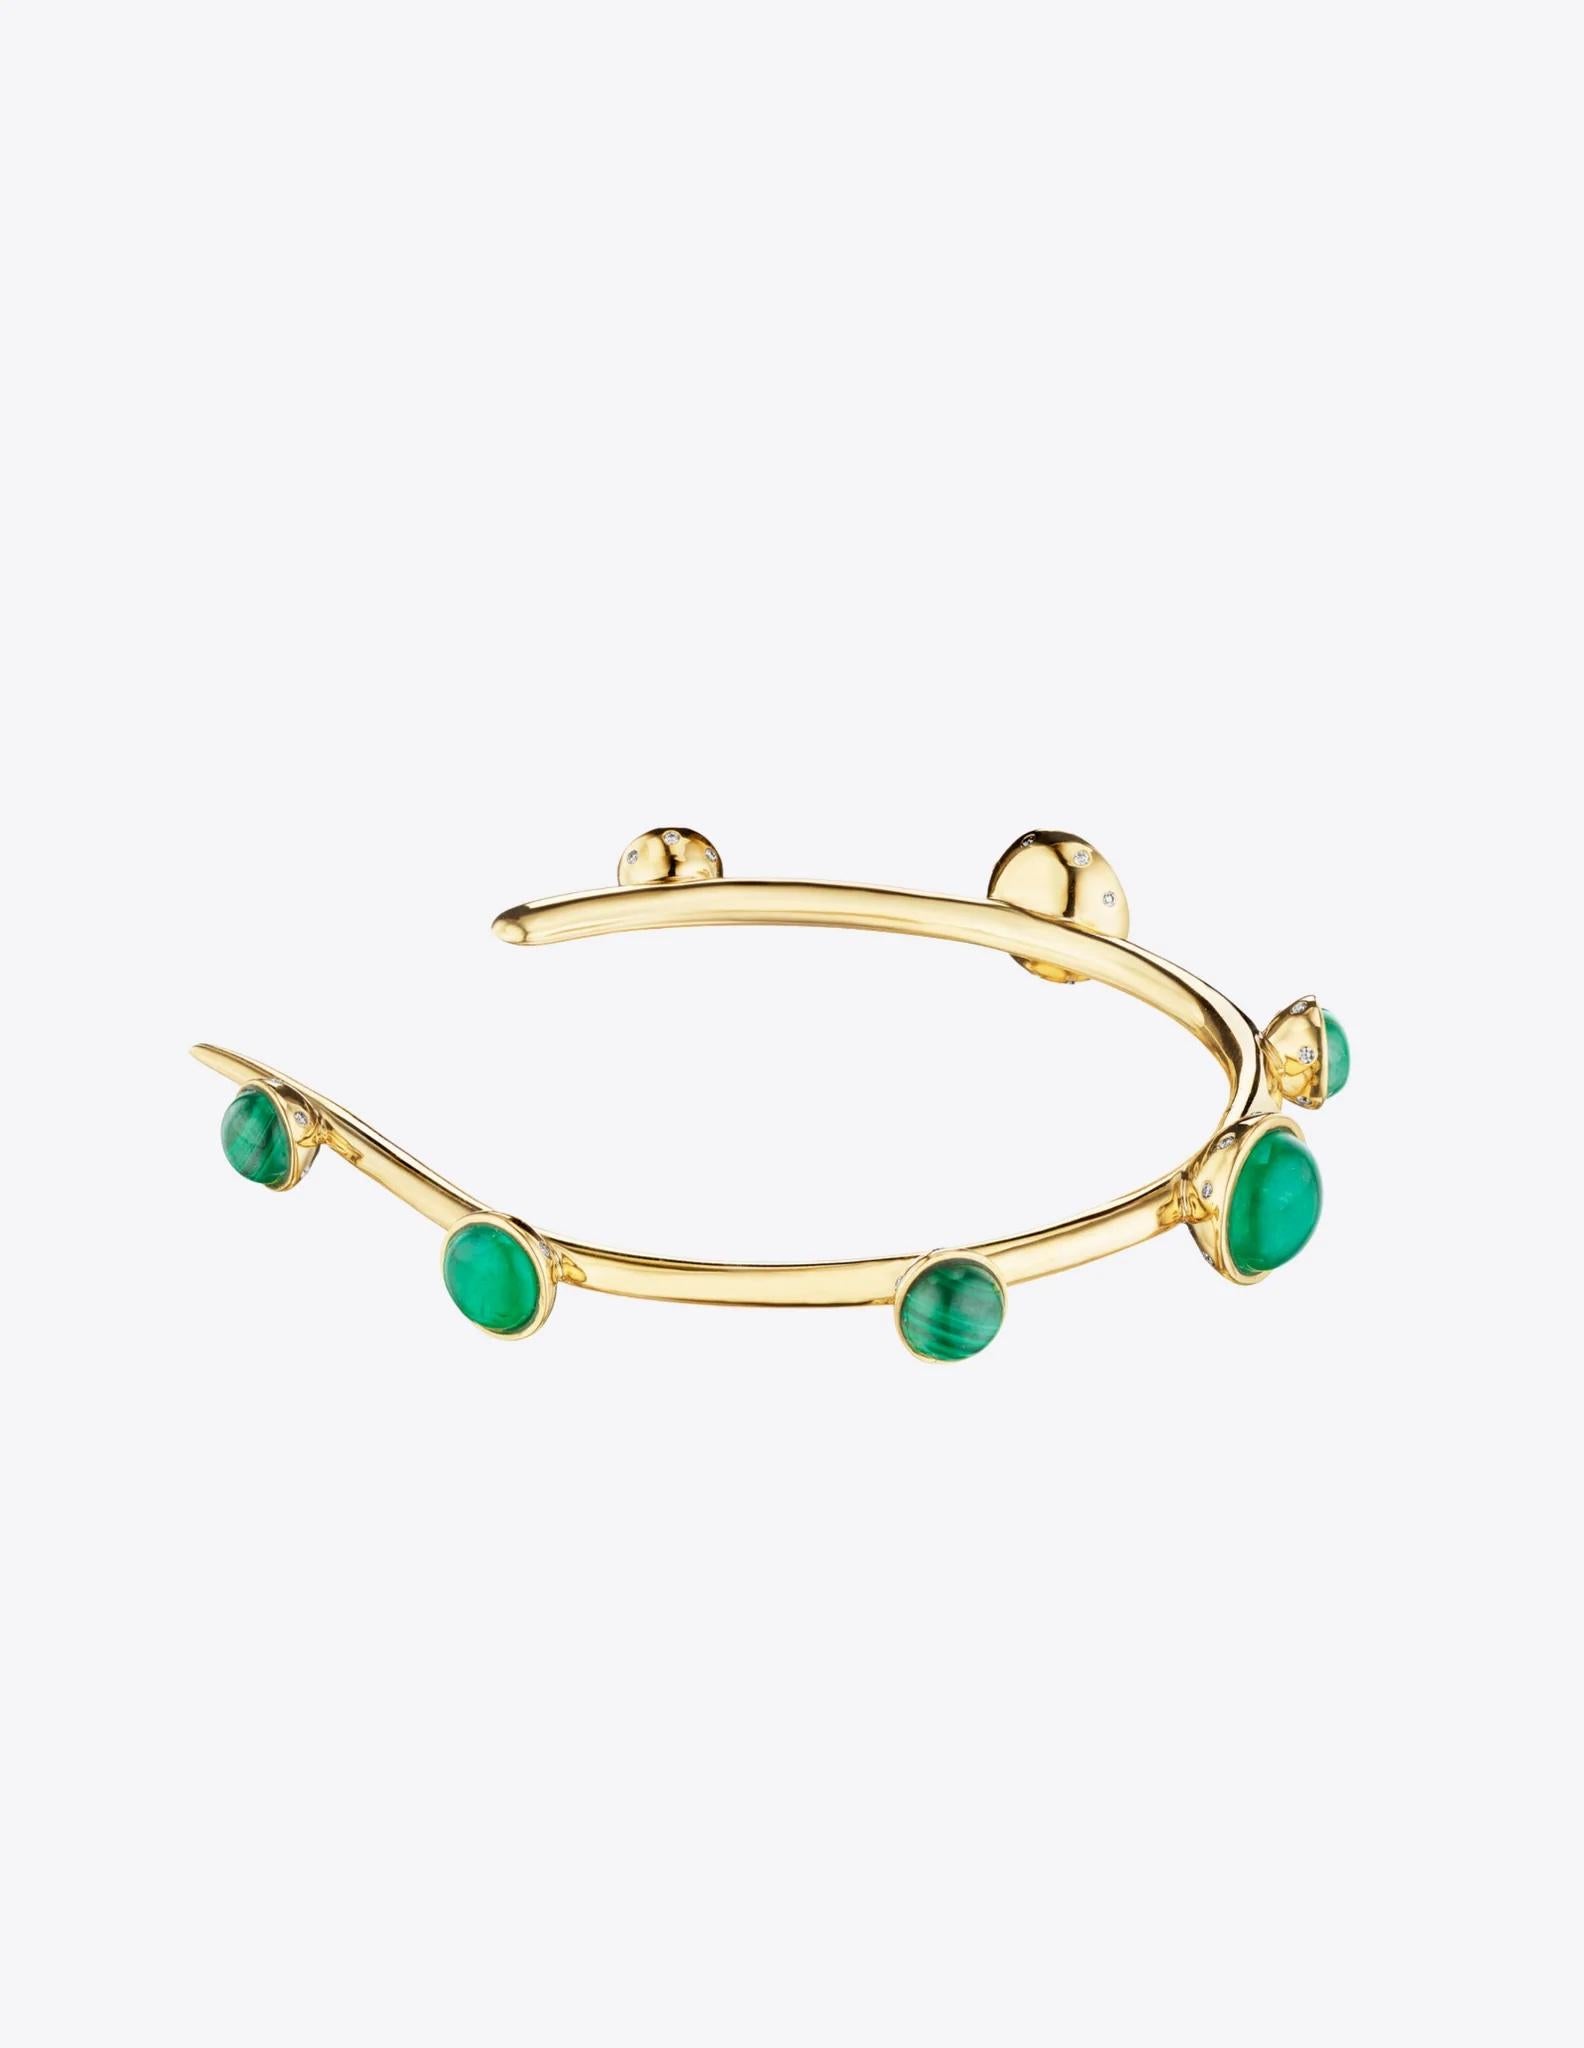 Staple Cuff in 18k Gold with Emerald and Malachite Cabochons & Diamonds In New Condition For Sale In Brooklyn, NY